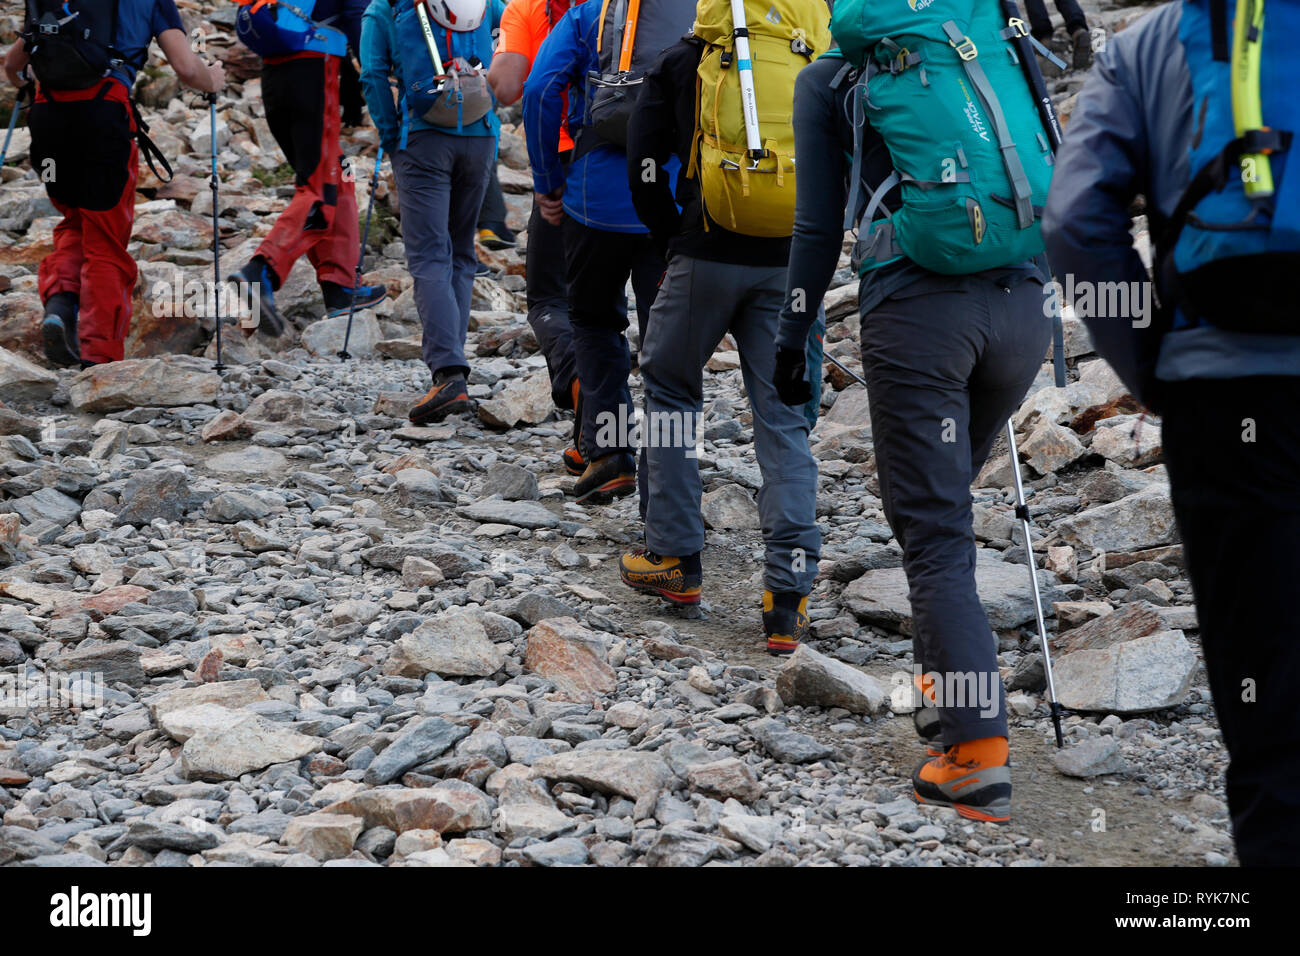 Alpinists during the ascent of Mont Blanc along the regular route via Gouter Refuge.   France. Stock Photo